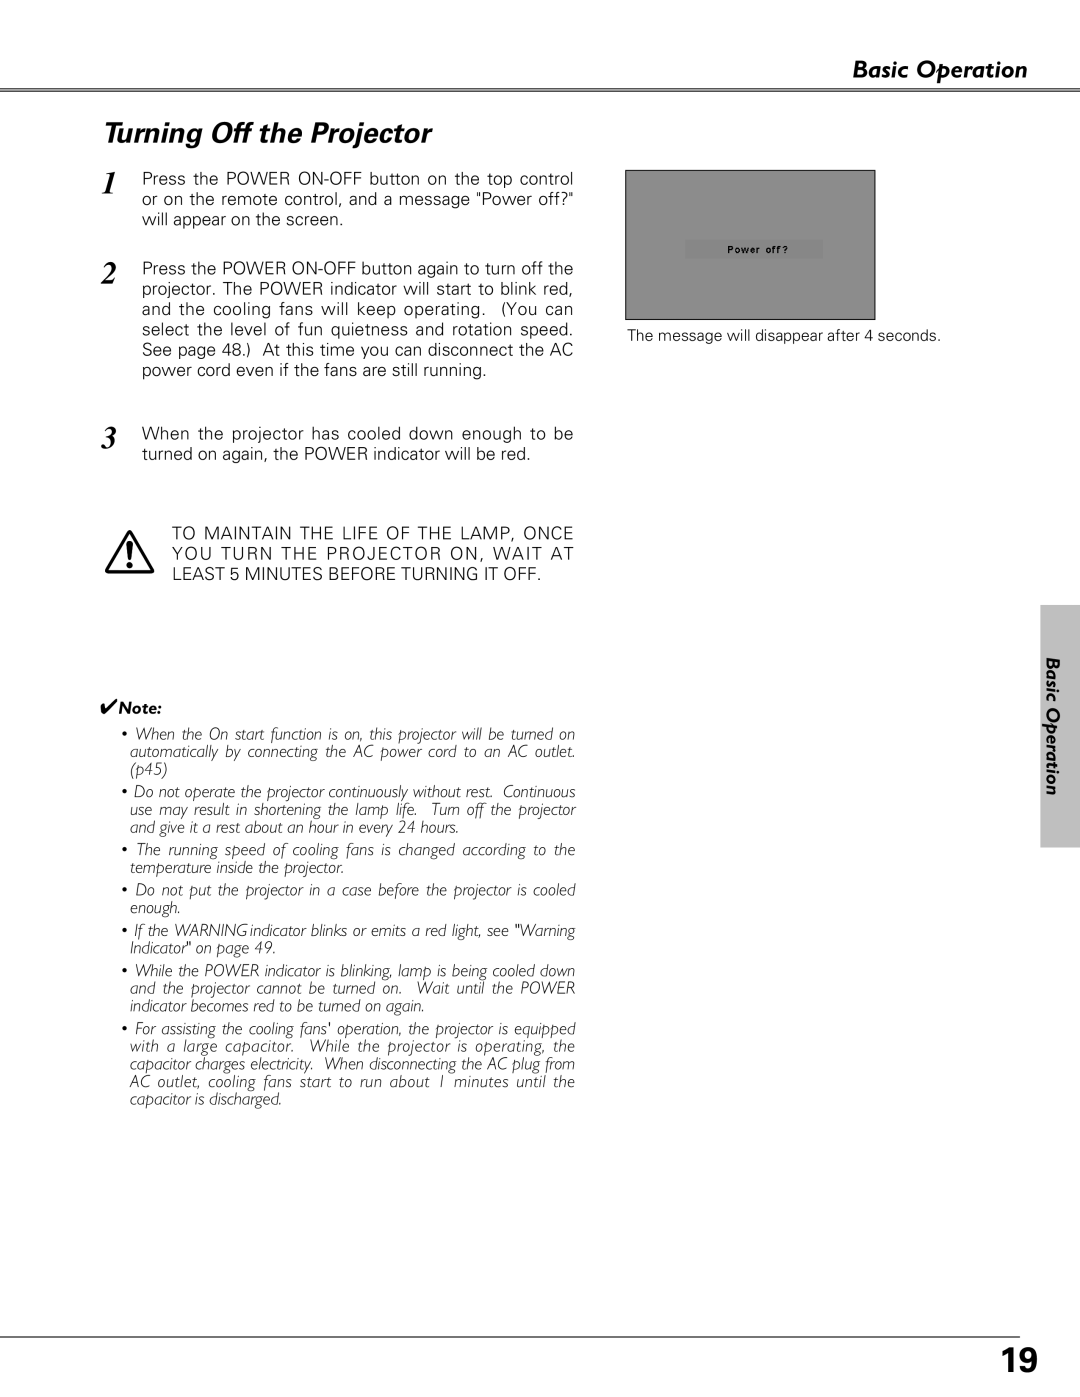 Eiki LC-XB23 owner manual Turning Off the Projector, Basic Operation 